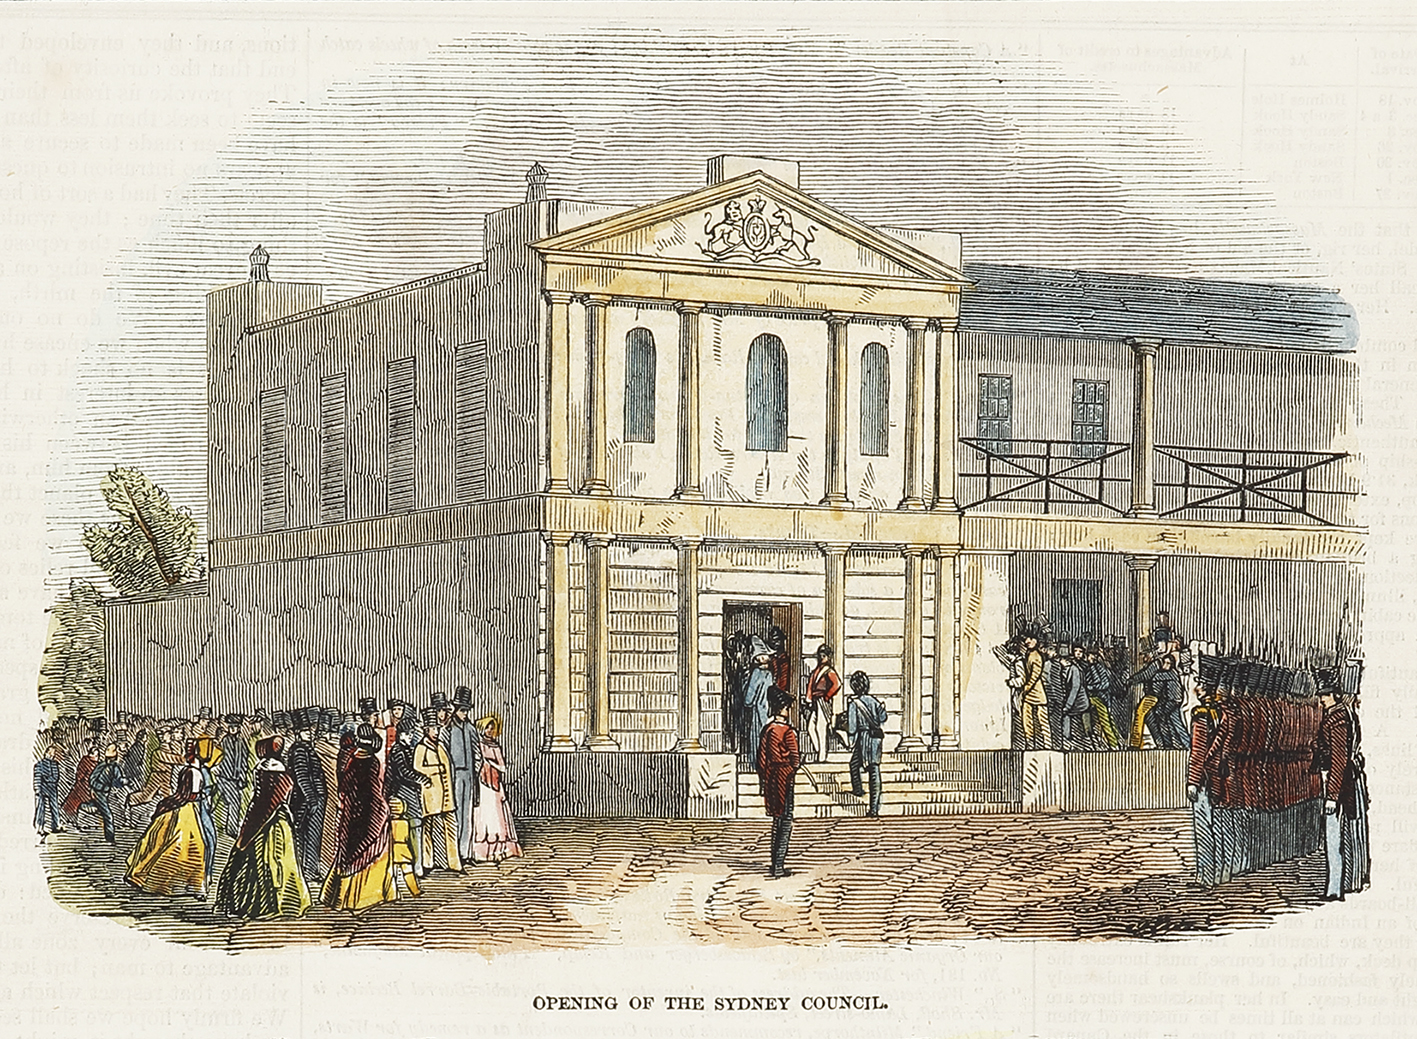 Opening of the Sydney Council. - Antique View from 1846